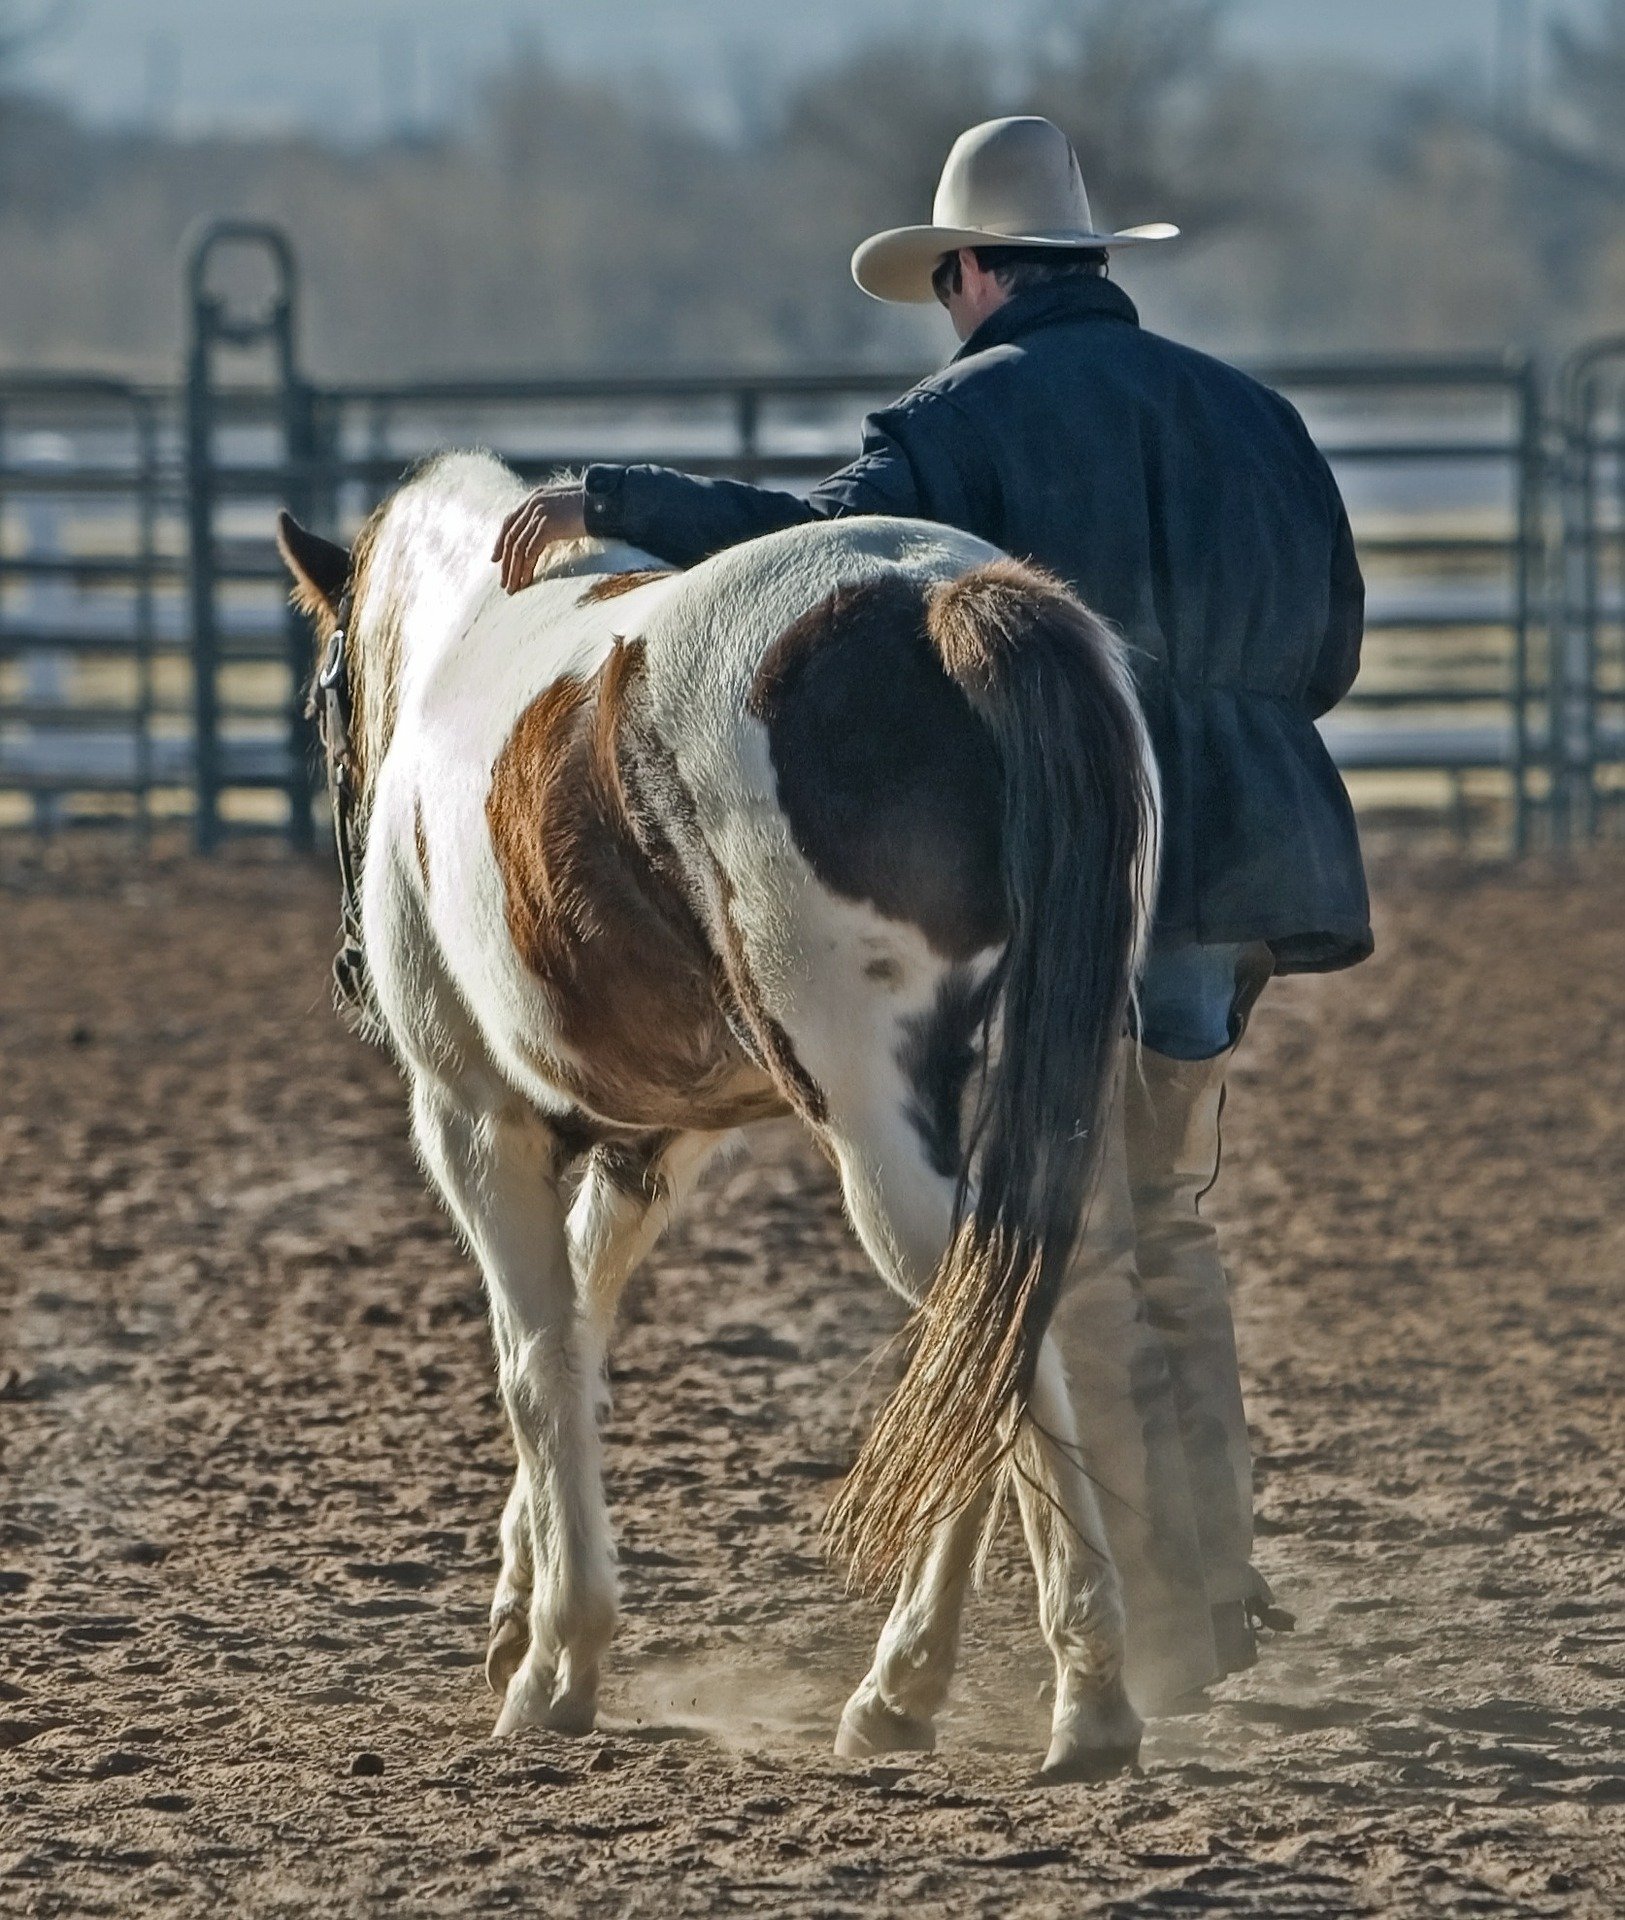 Pictured - A cowboy and a horse pony on a ranch | Source: Pixabay